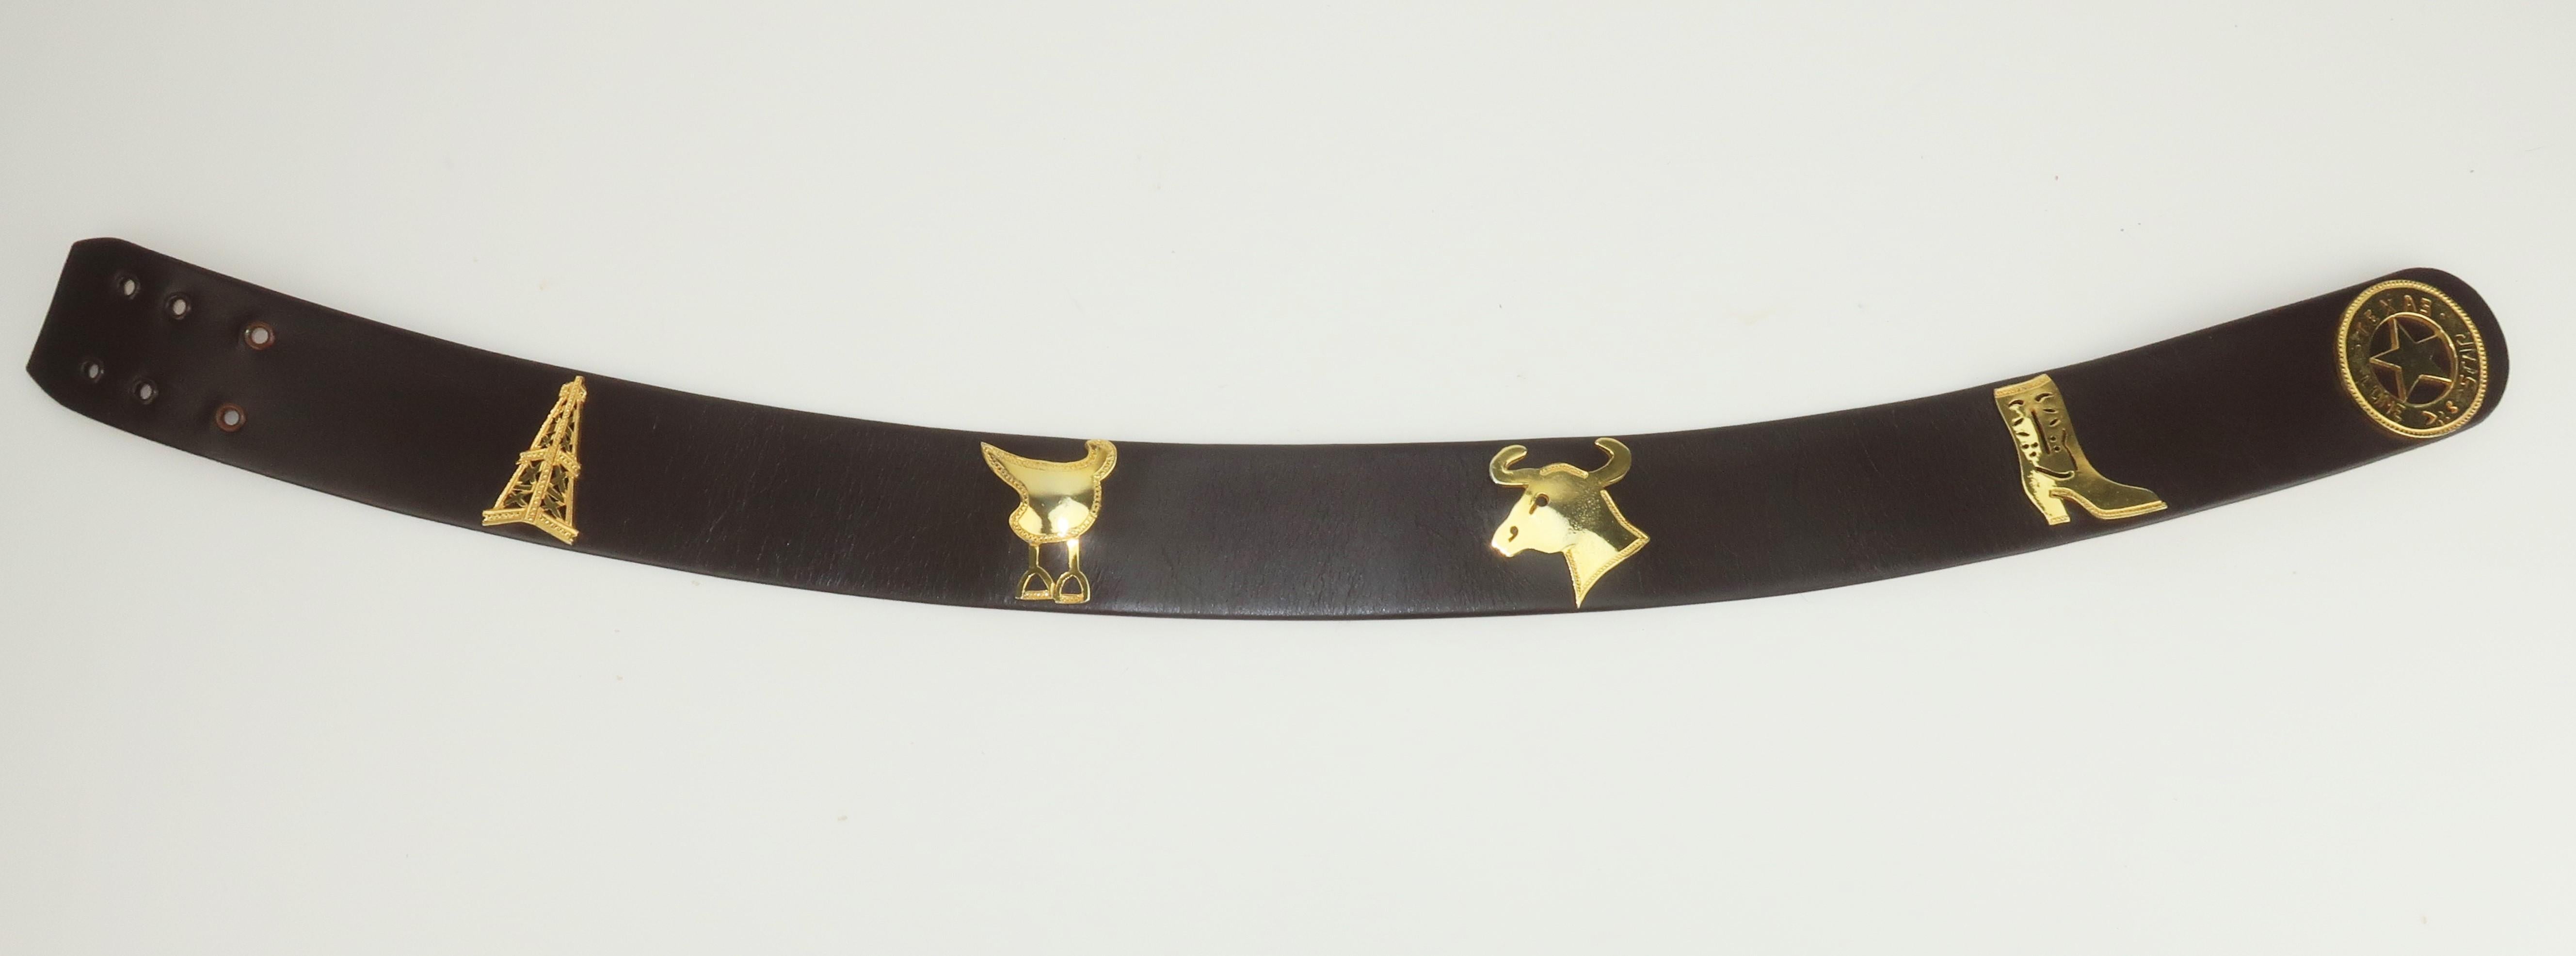 Neiman Marcus Texas Novelty Brown Leather Belt, 1960's In Good Condition For Sale In Atlanta, GA